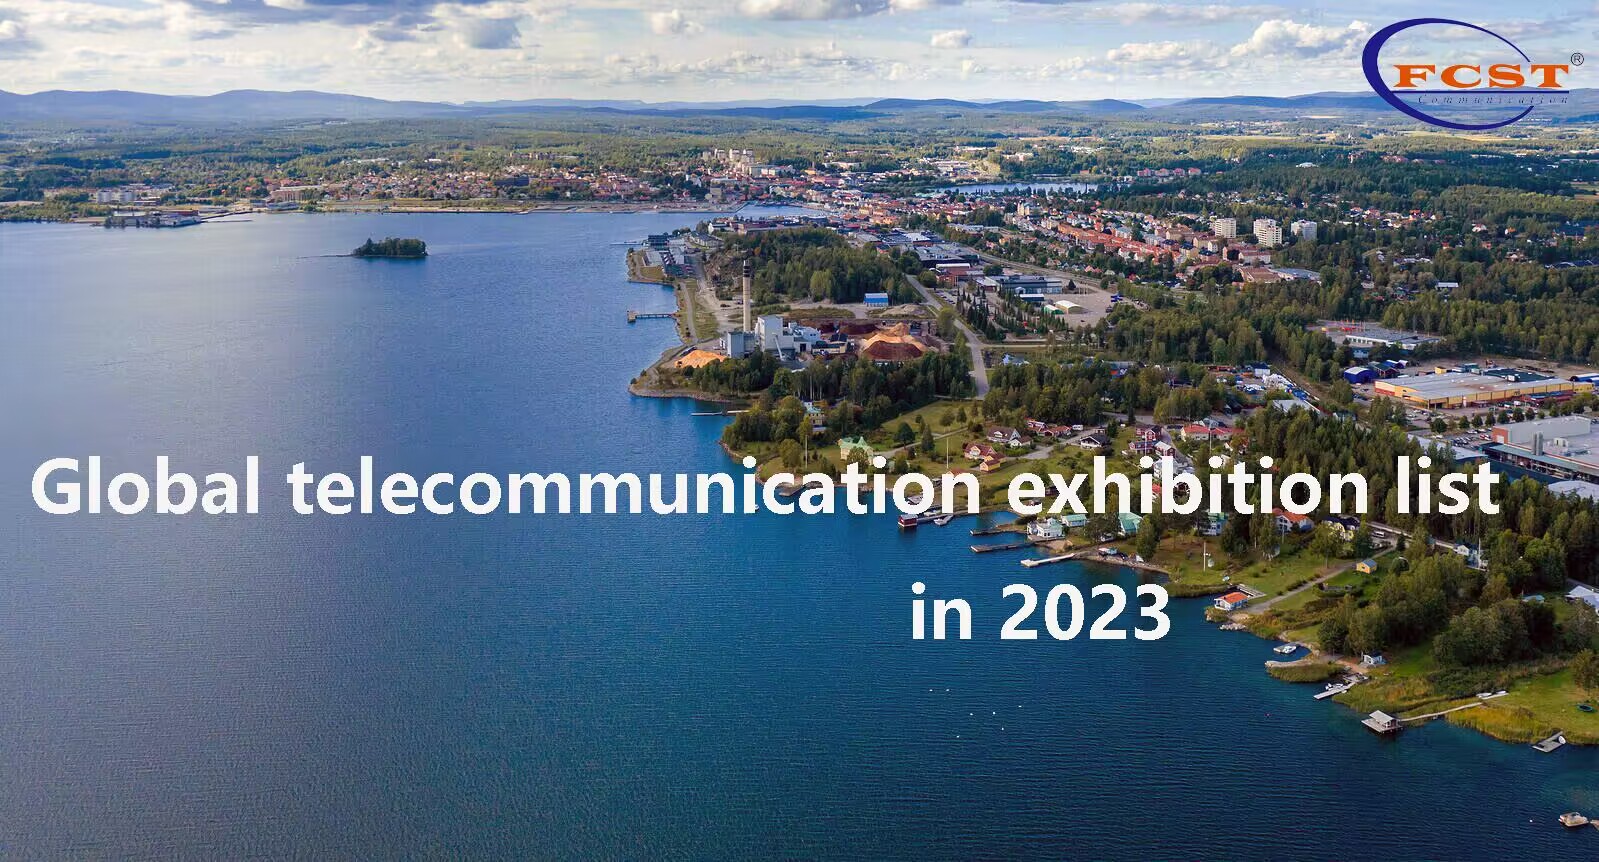 Global telecommunication exhibition list in 2023 